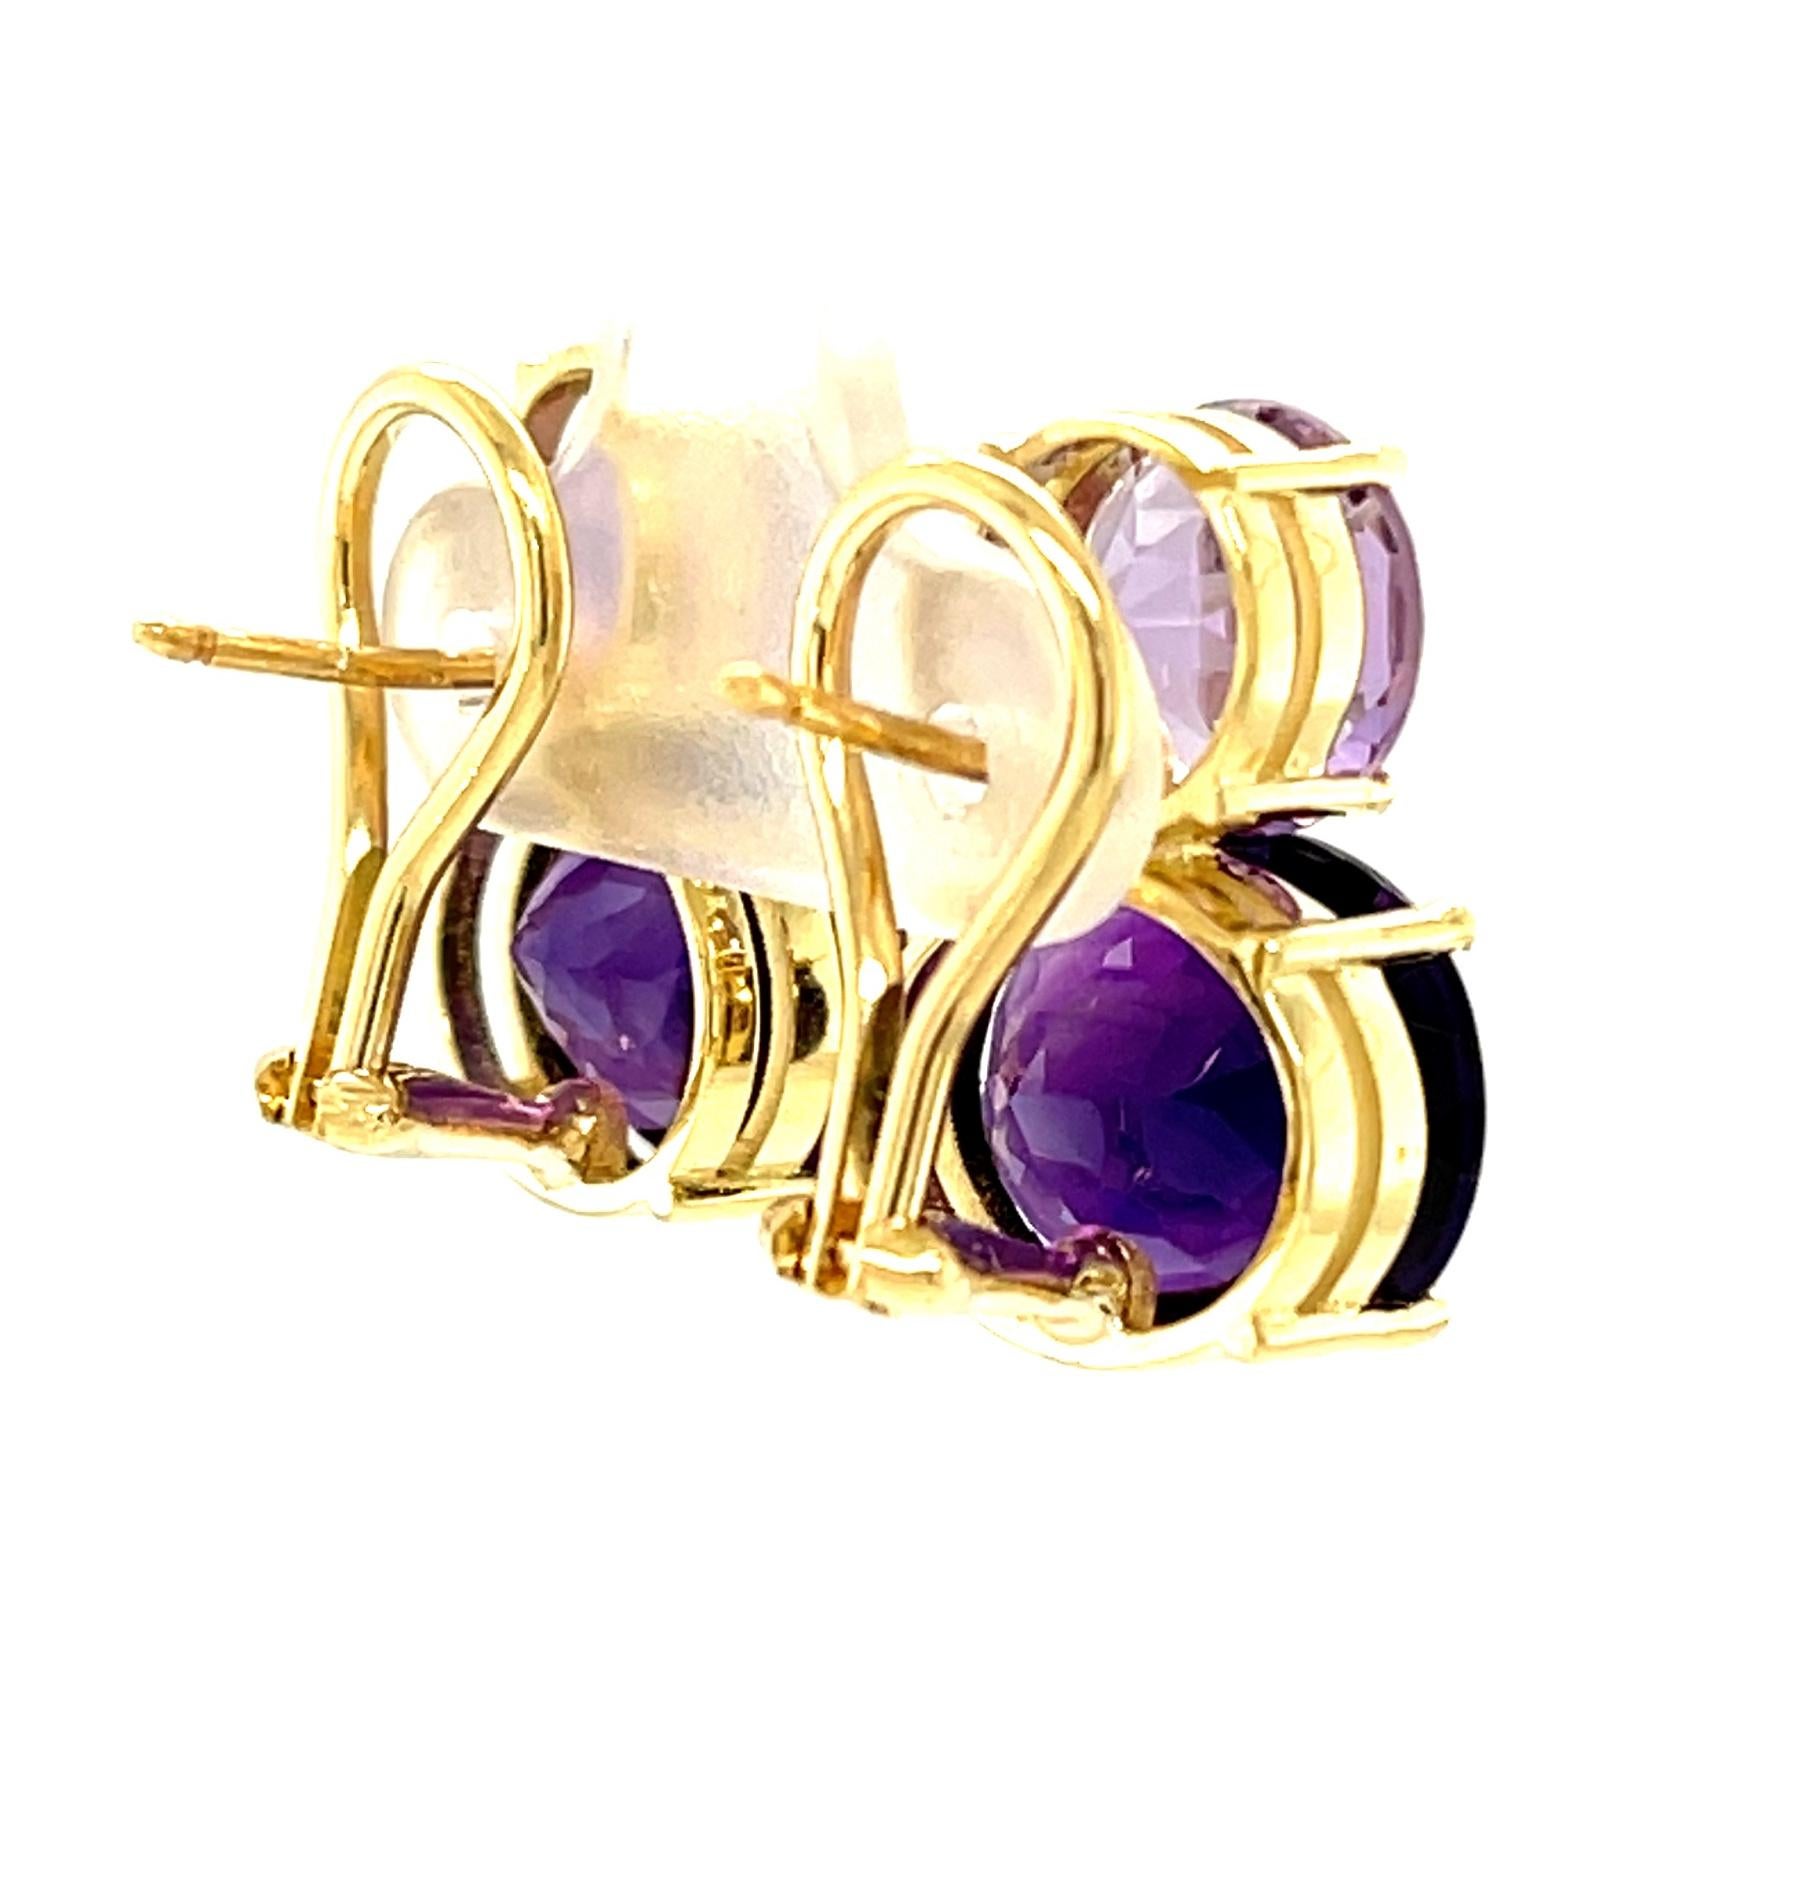 17.17 Carats Total Amethyst Earrings in Yellow Gold with Omega French Clips In New Condition For Sale In Los Angeles, CA